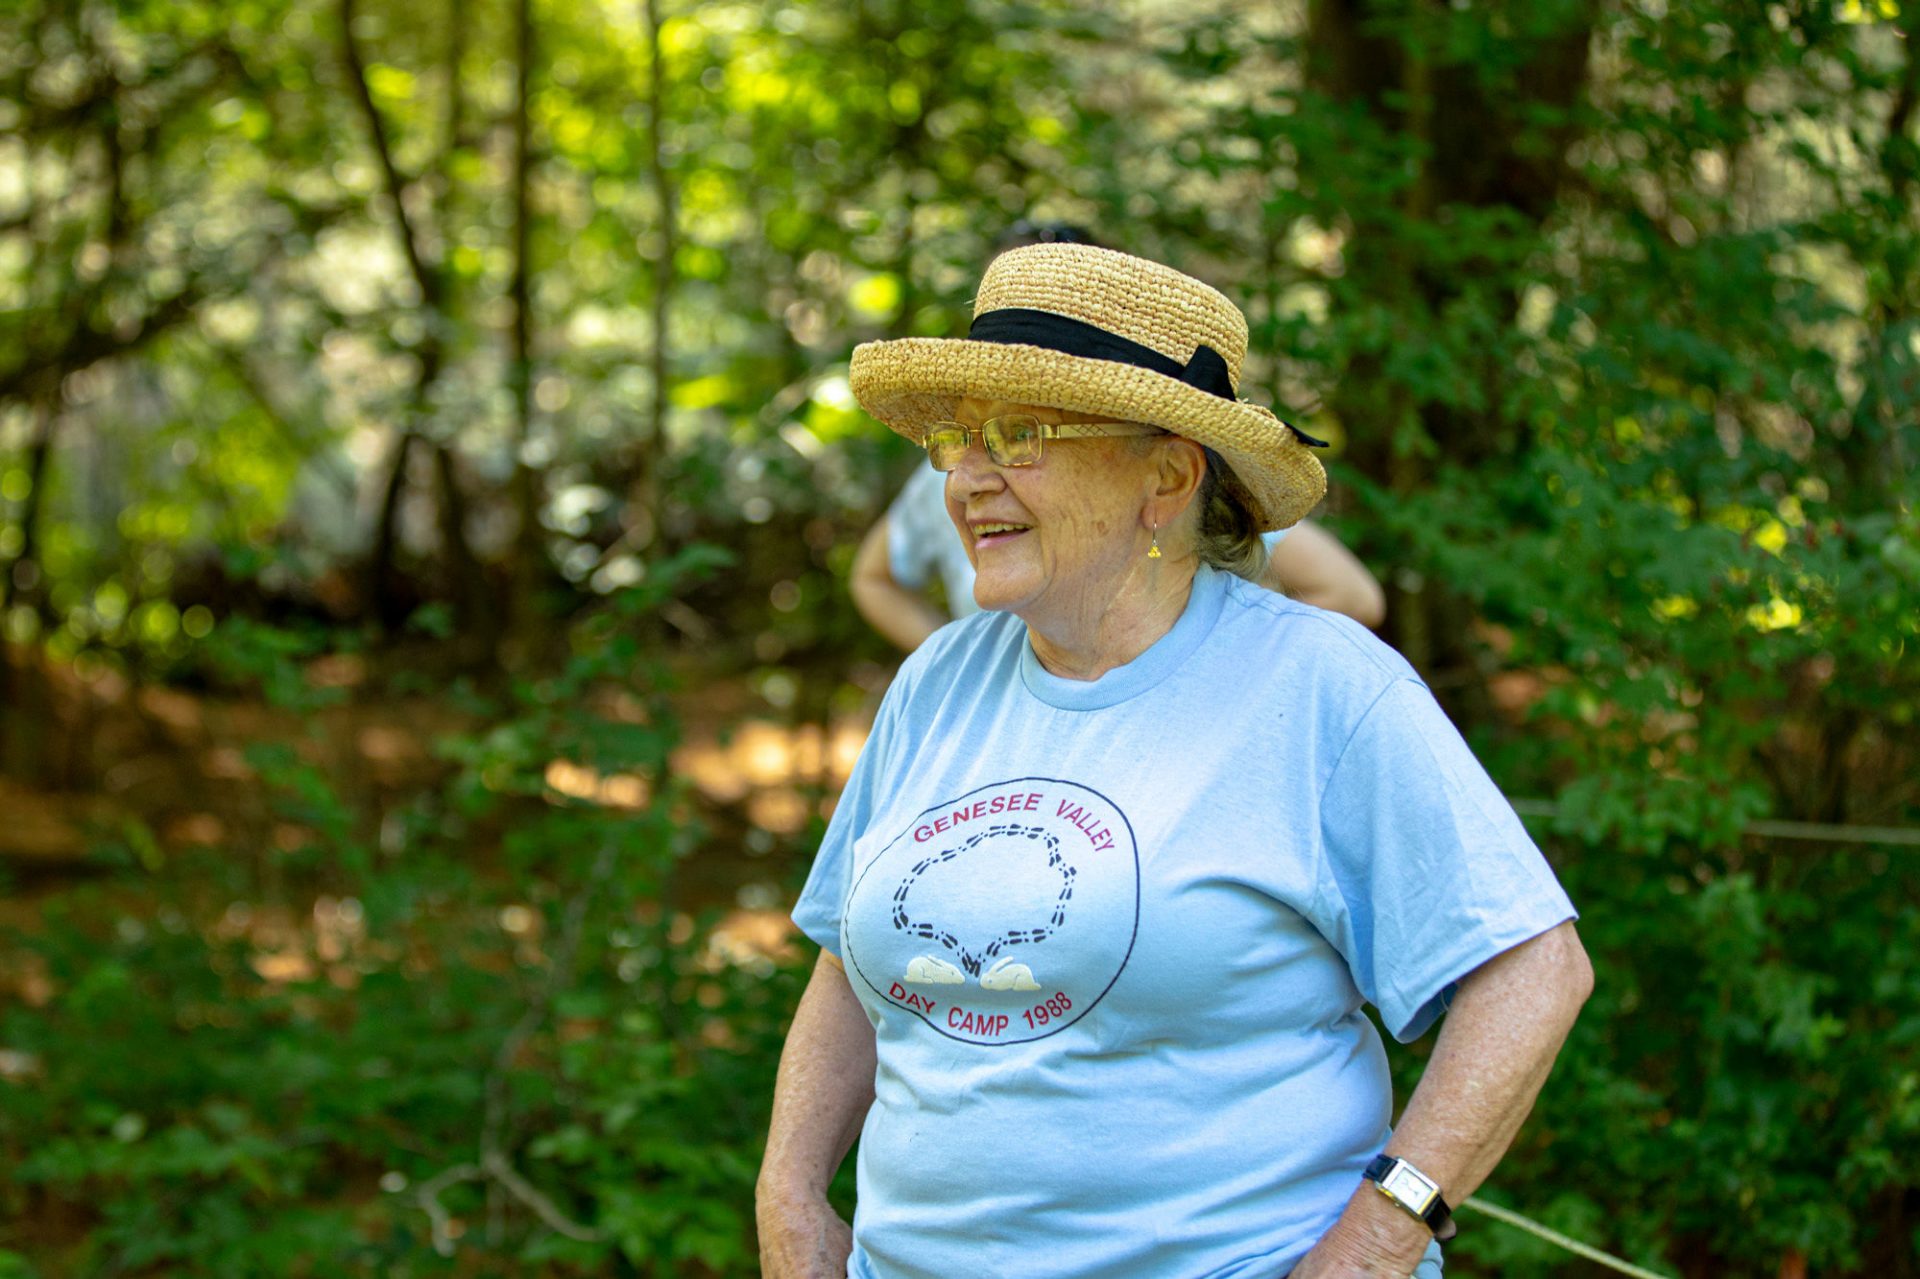 A smiling older woman with a light skin tone wearing a sunhat, glasses, and a blue T shirt that reads "Genesee Valley Day Camp"